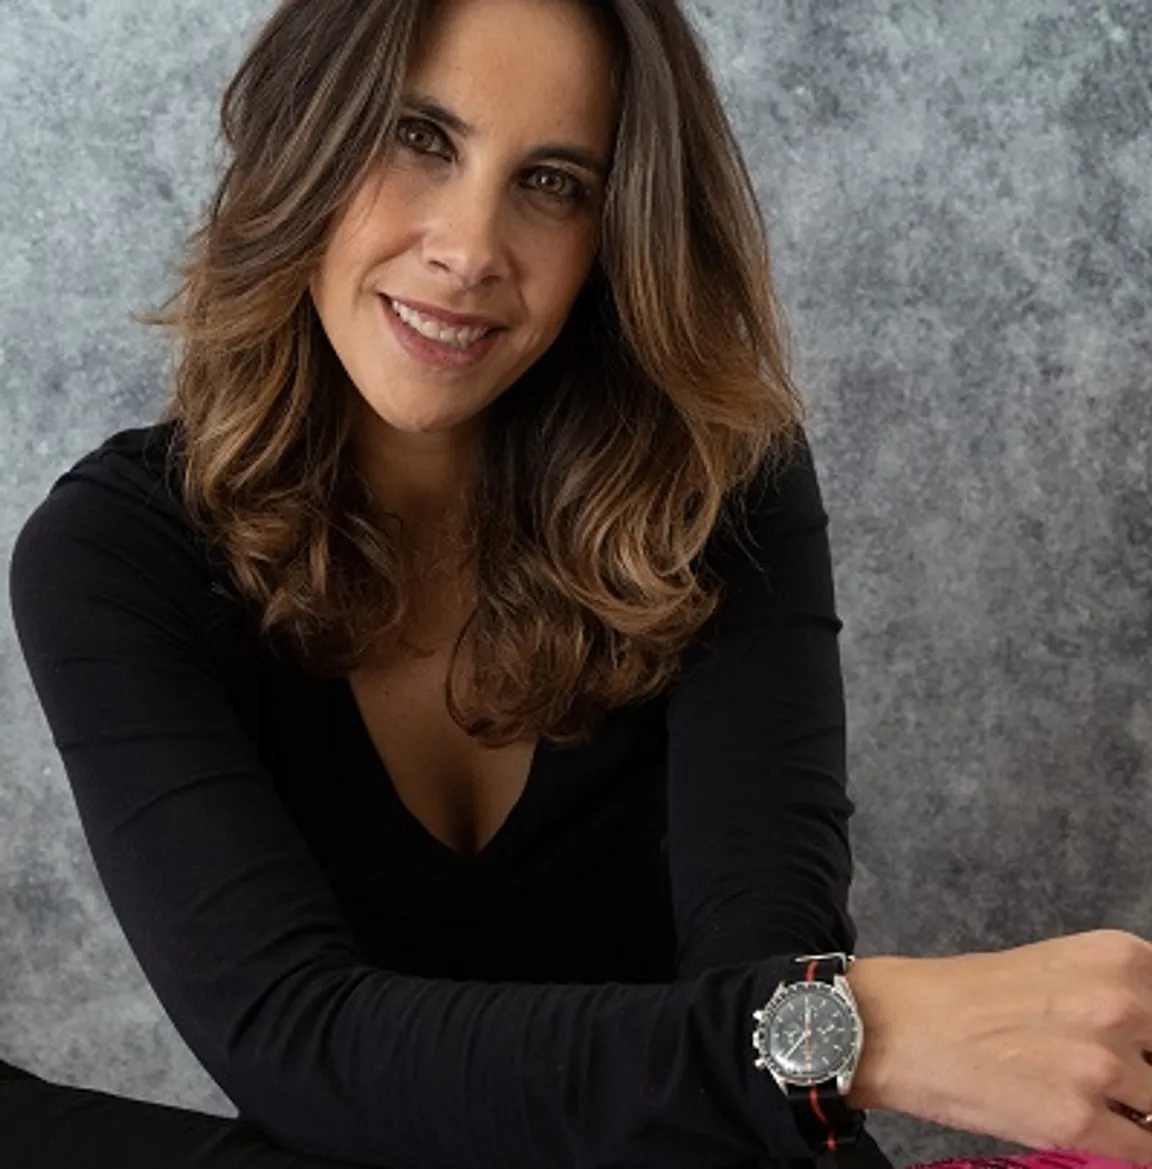 5 Lessons Every Woman Entrepreneur Should Learn from Giorgia Mondani